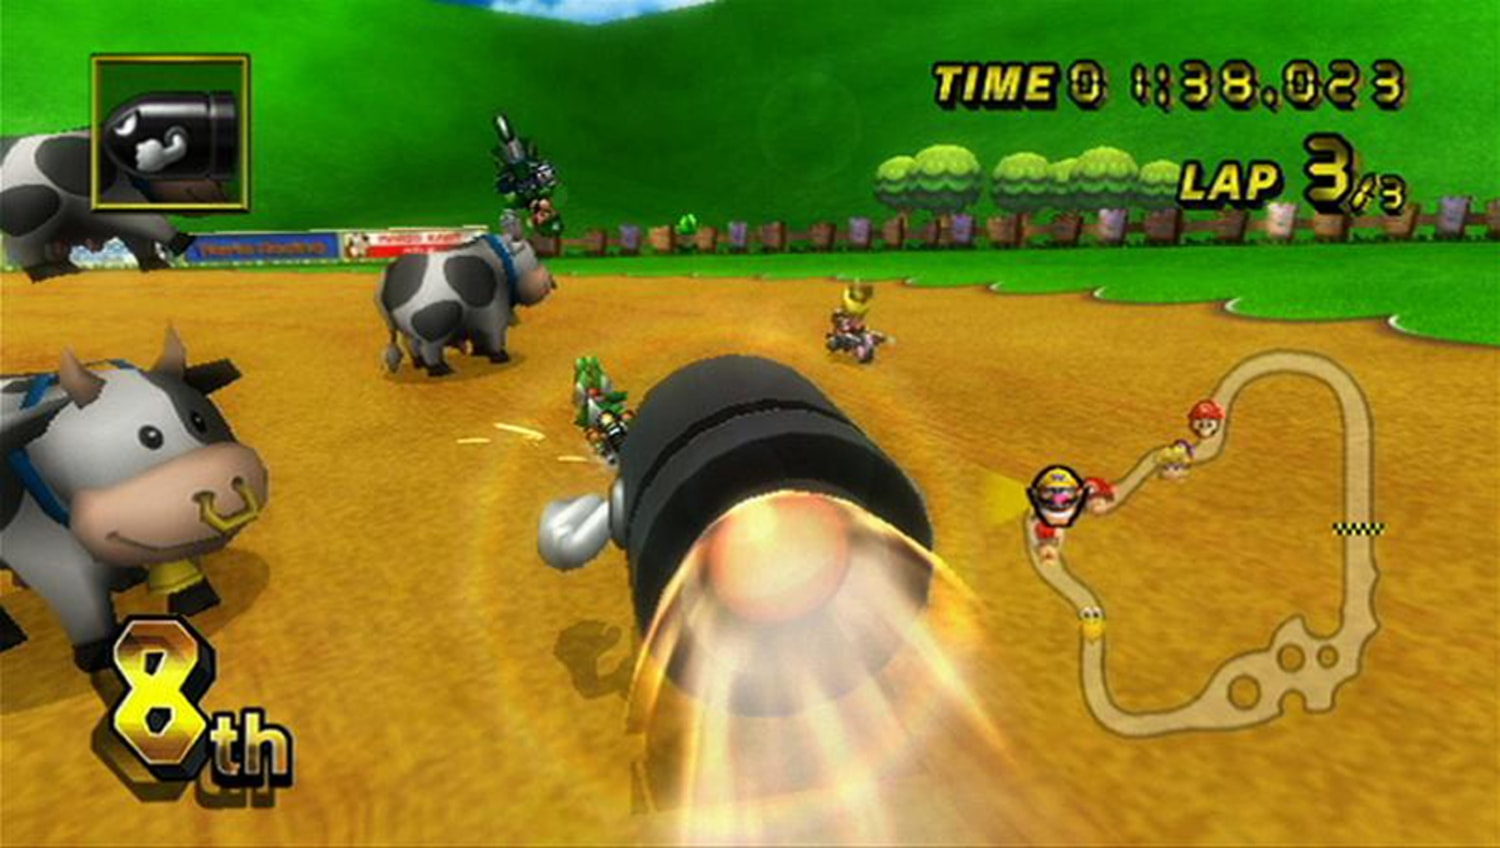 Online play makes 'Mario Kart Wii' a must-have